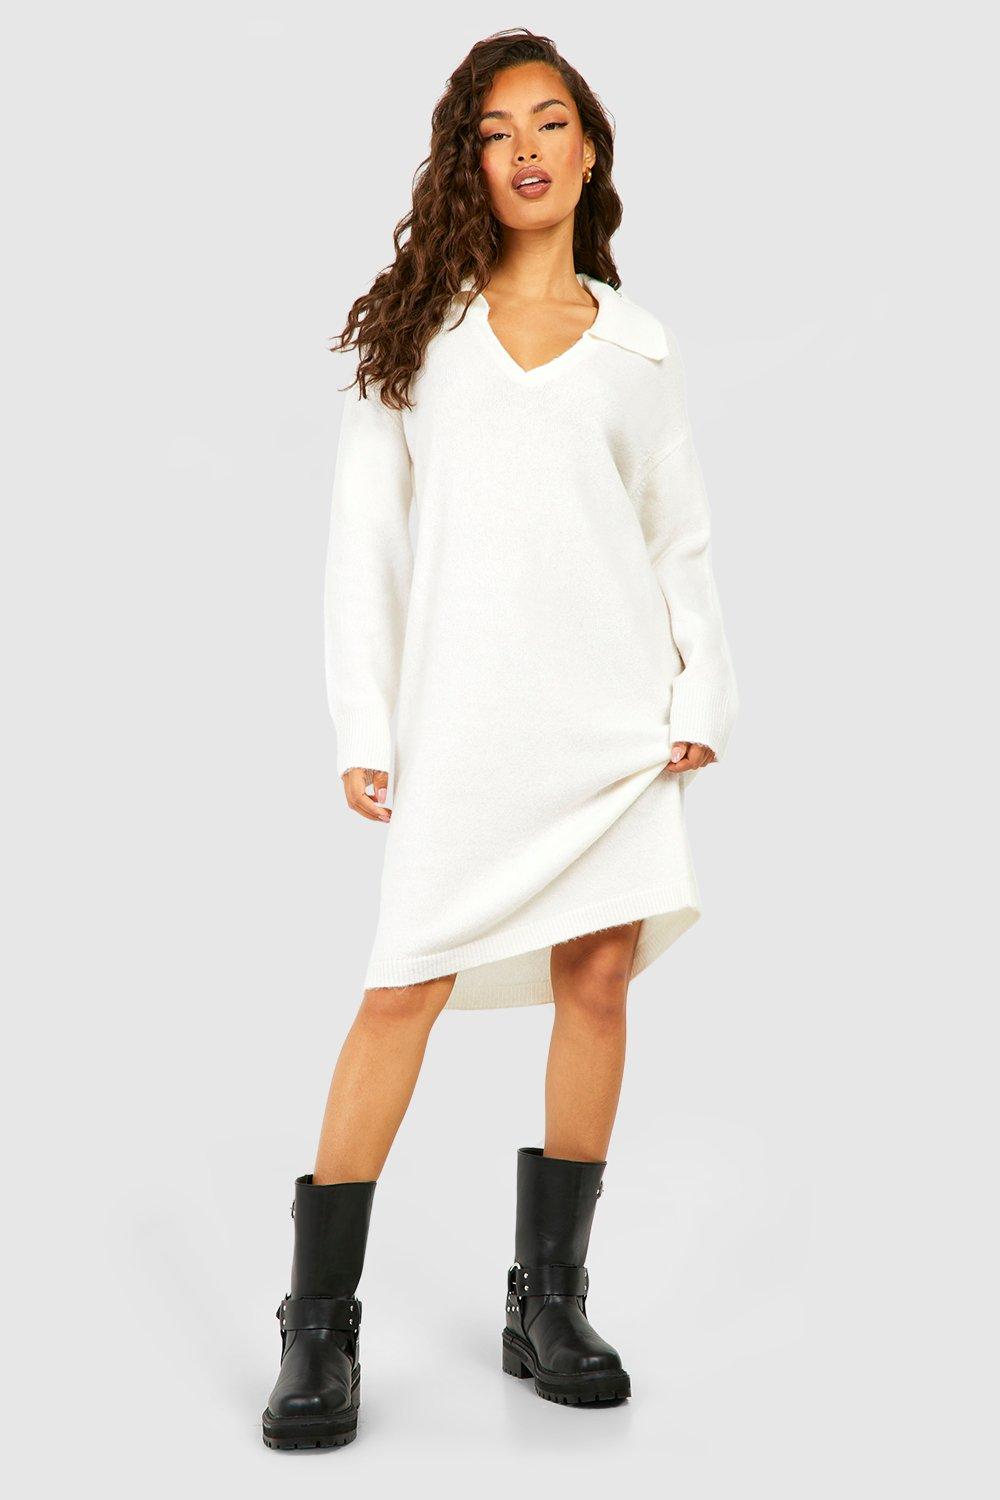 How should I wear white sweater dress? - Quora